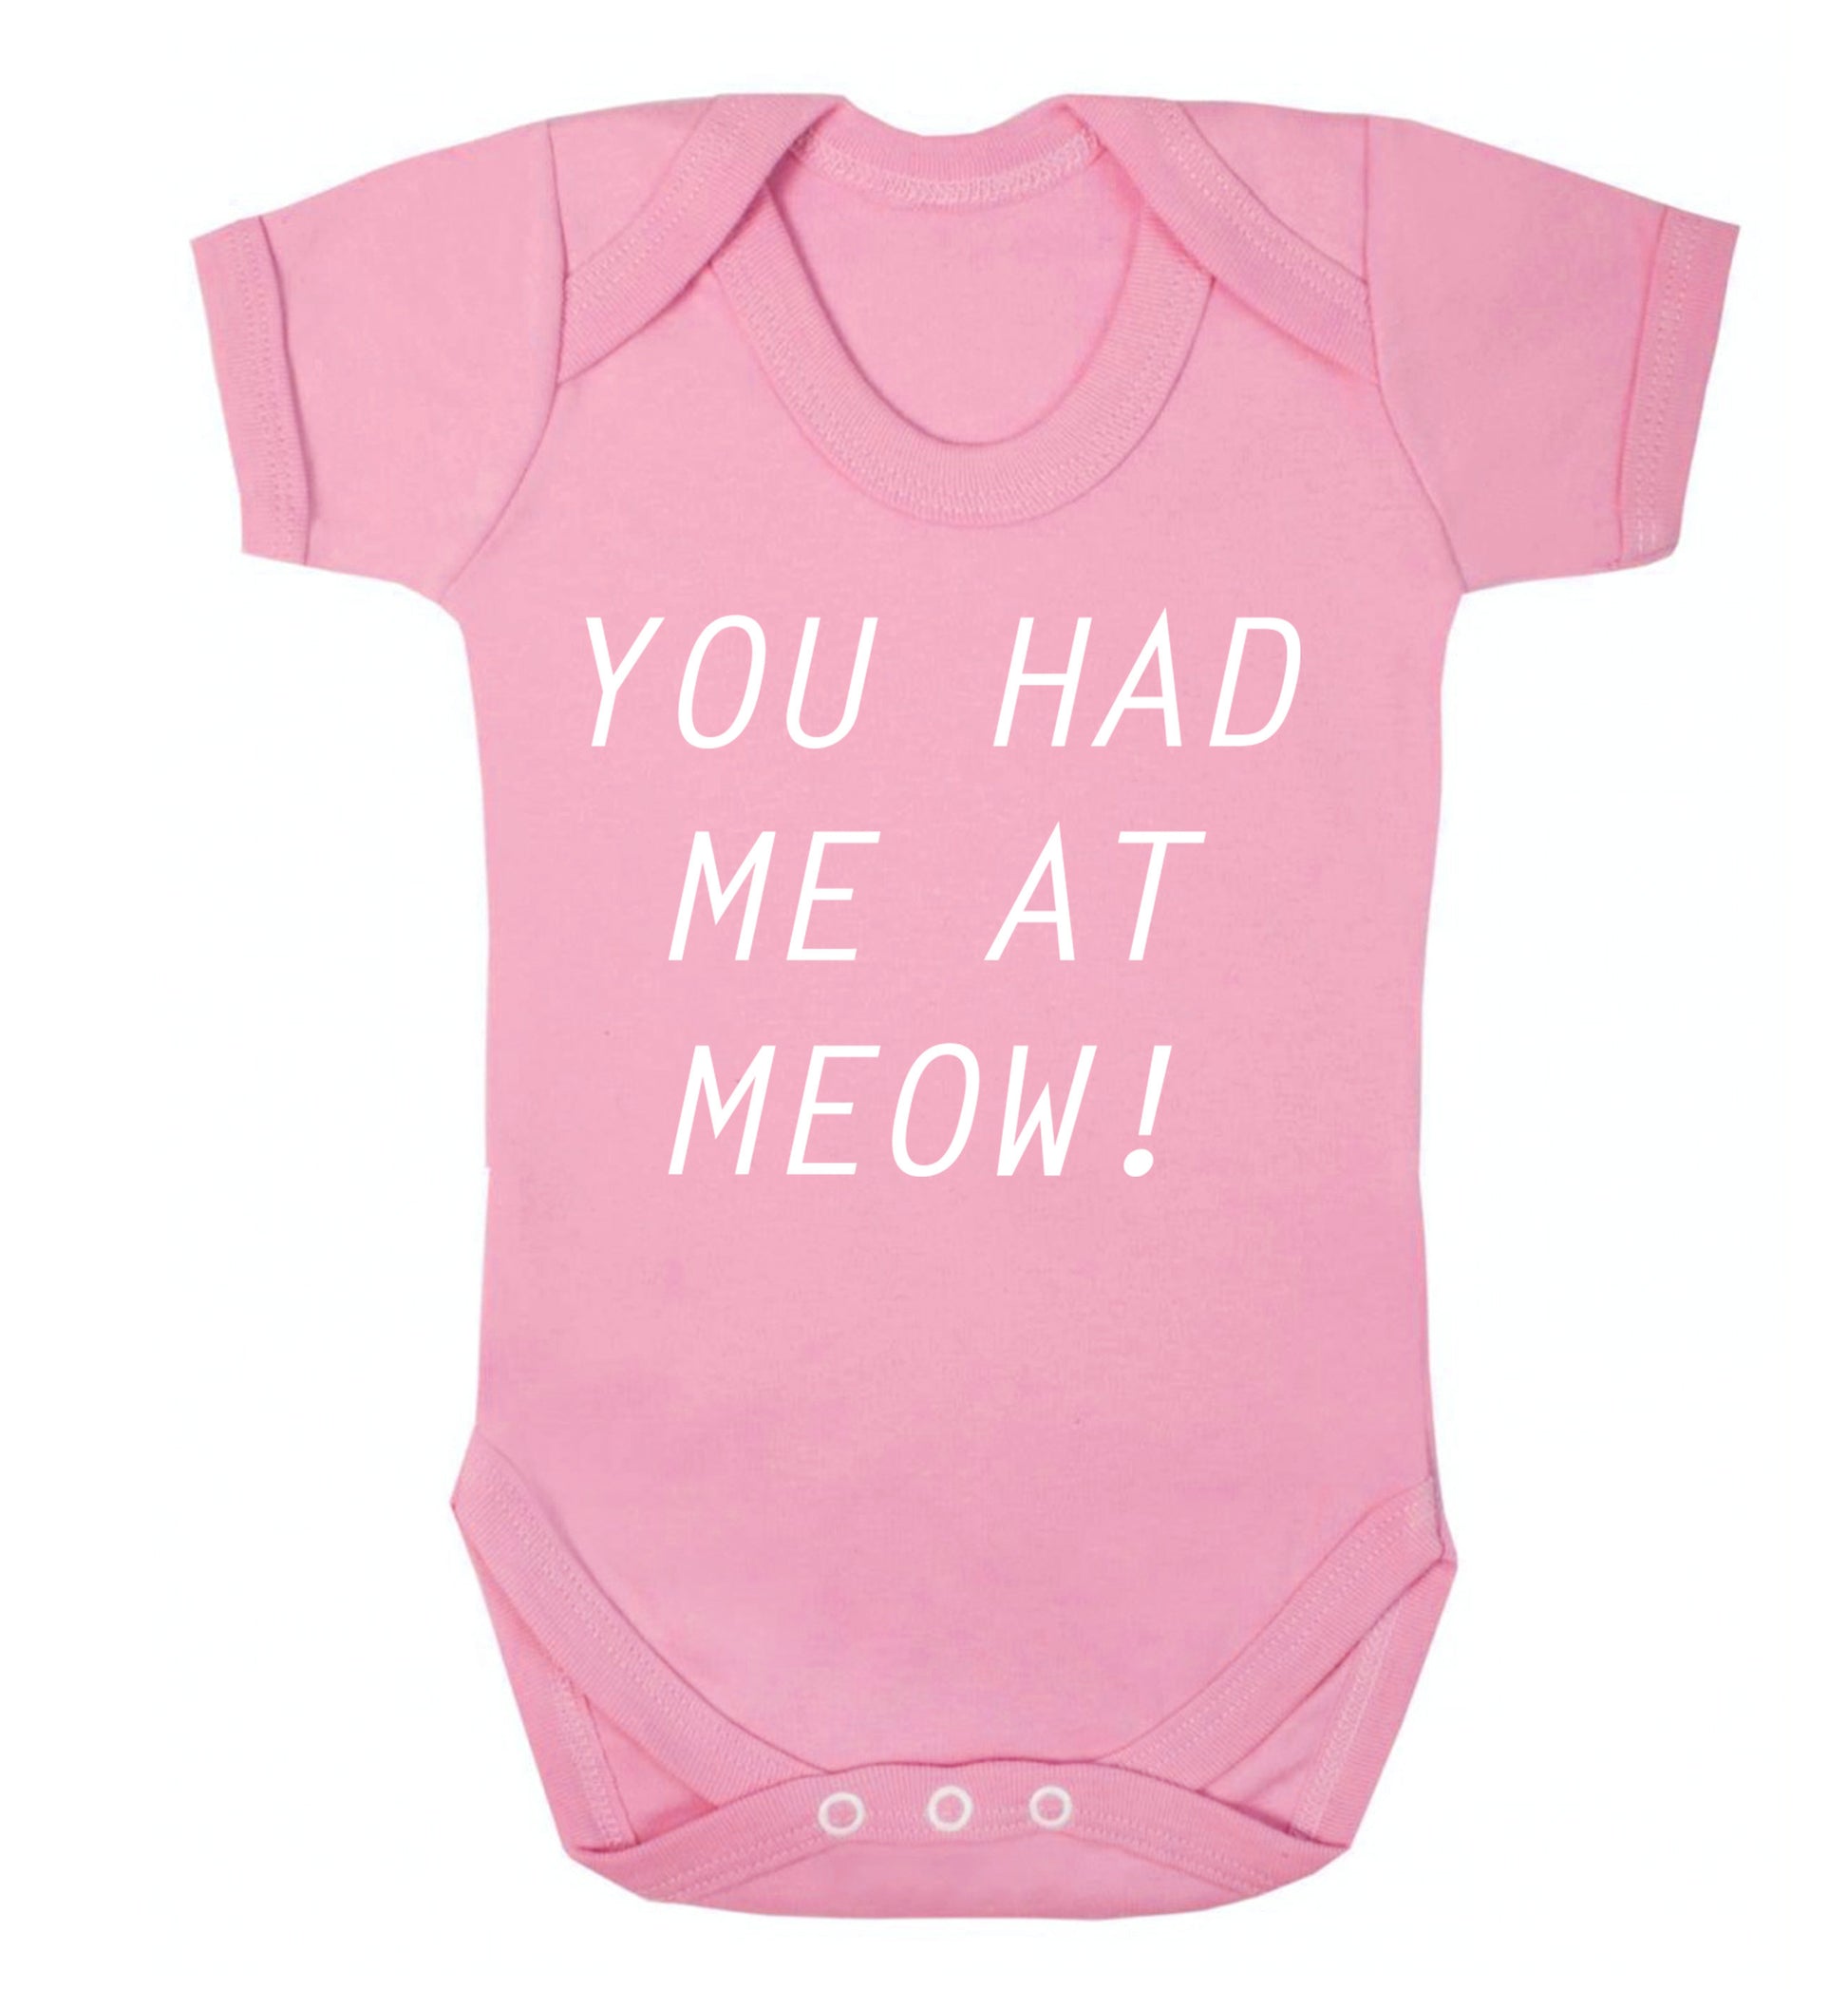 You had me at meow Baby Vest pale pink 18-24 months